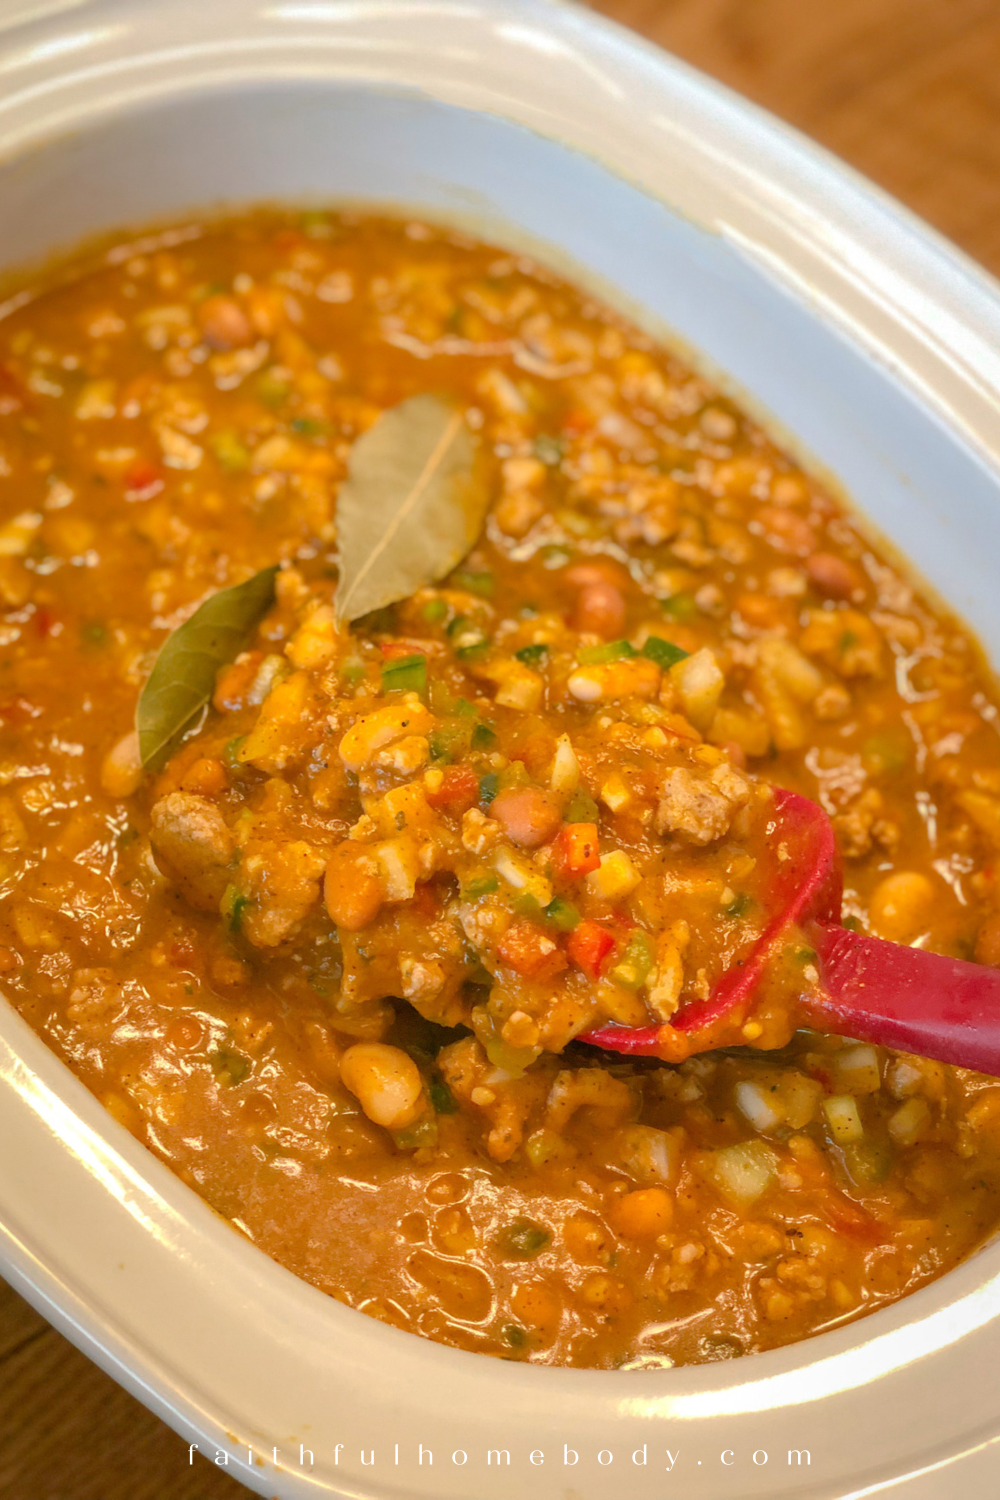 A white slow-cooker is filled with the Turkey and Two-Bean Pumpkin Chili.  A red spatula is dipped into the chili, emphasizing the ingredients.